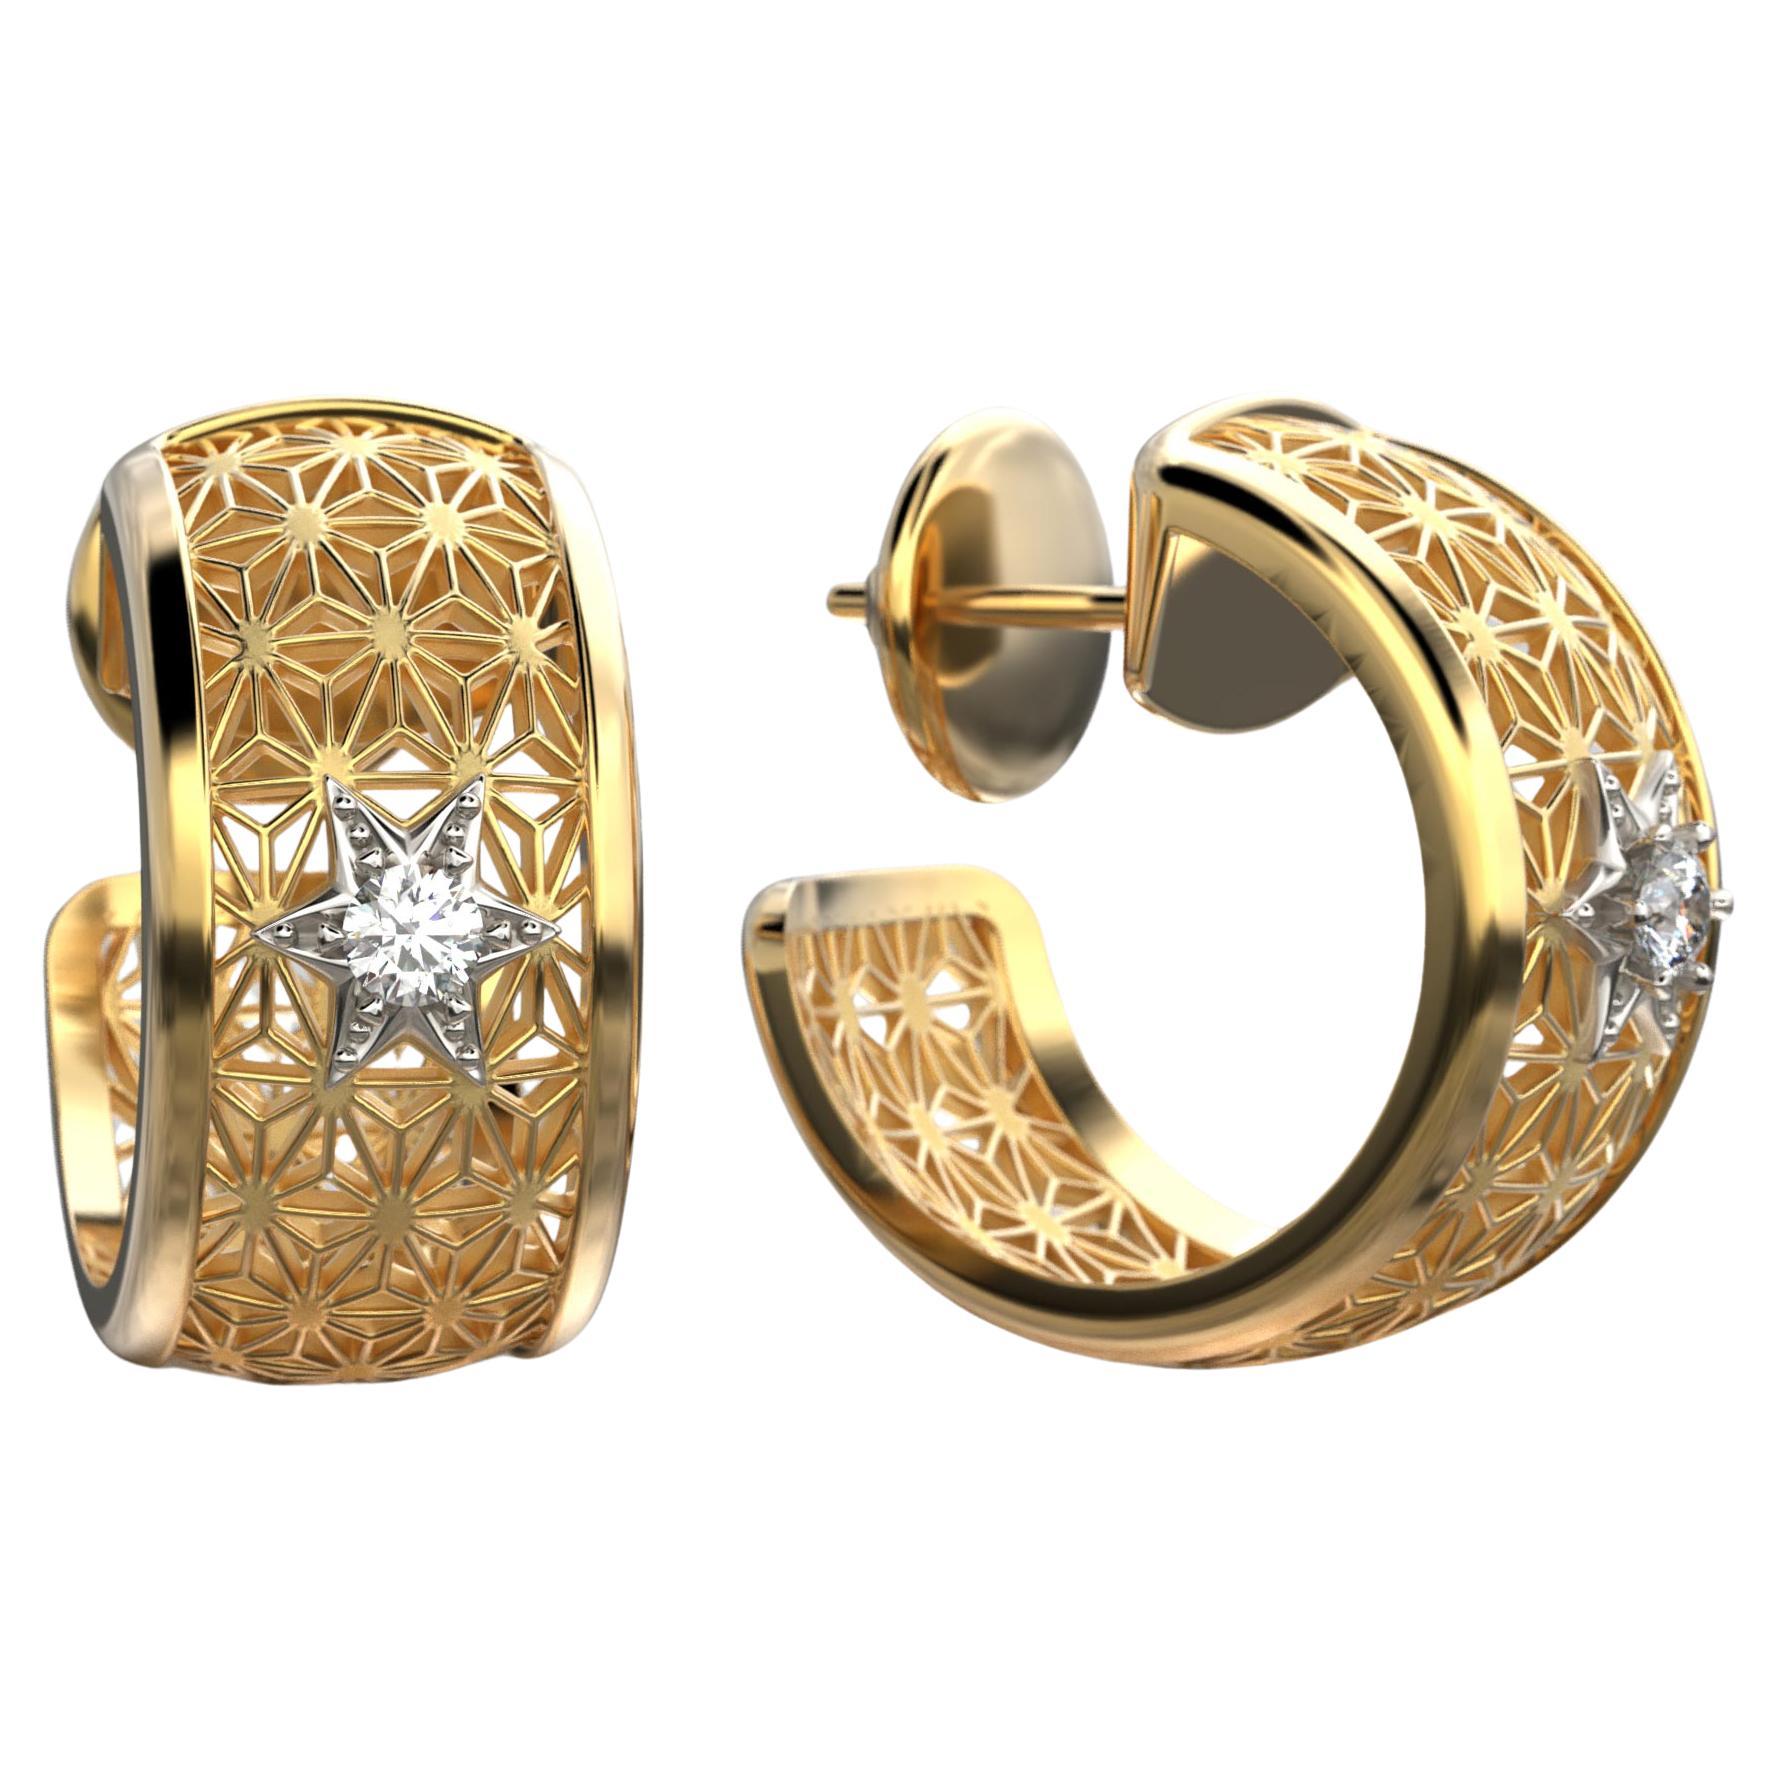 Oltremare Gioielli Diamond Hoop Earrings 18k Gold Made in Italy, Sashiko Pattern For Sale